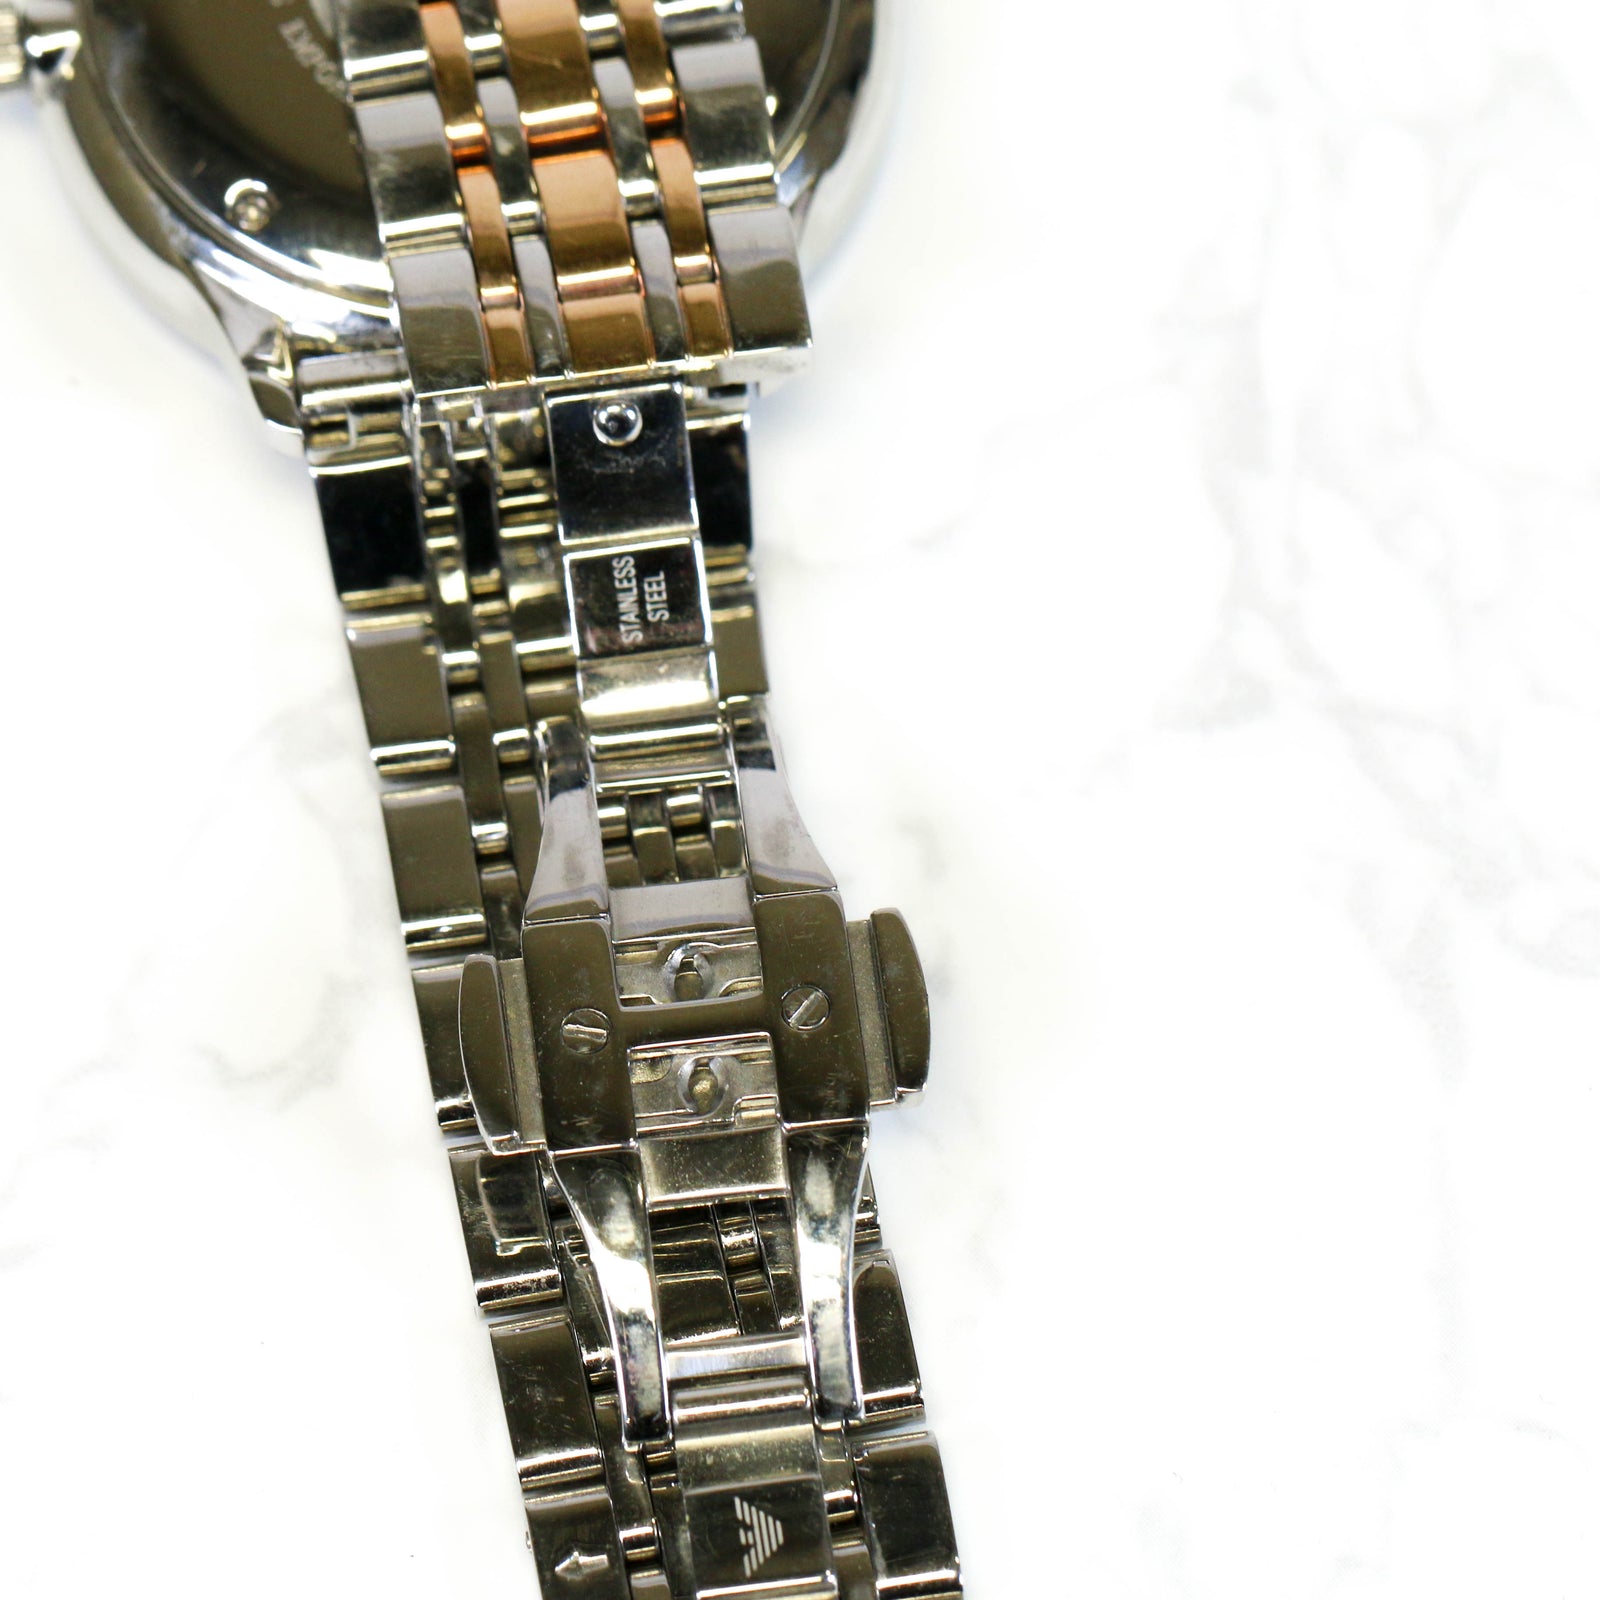 Two-Tone Stainless Steel Watch